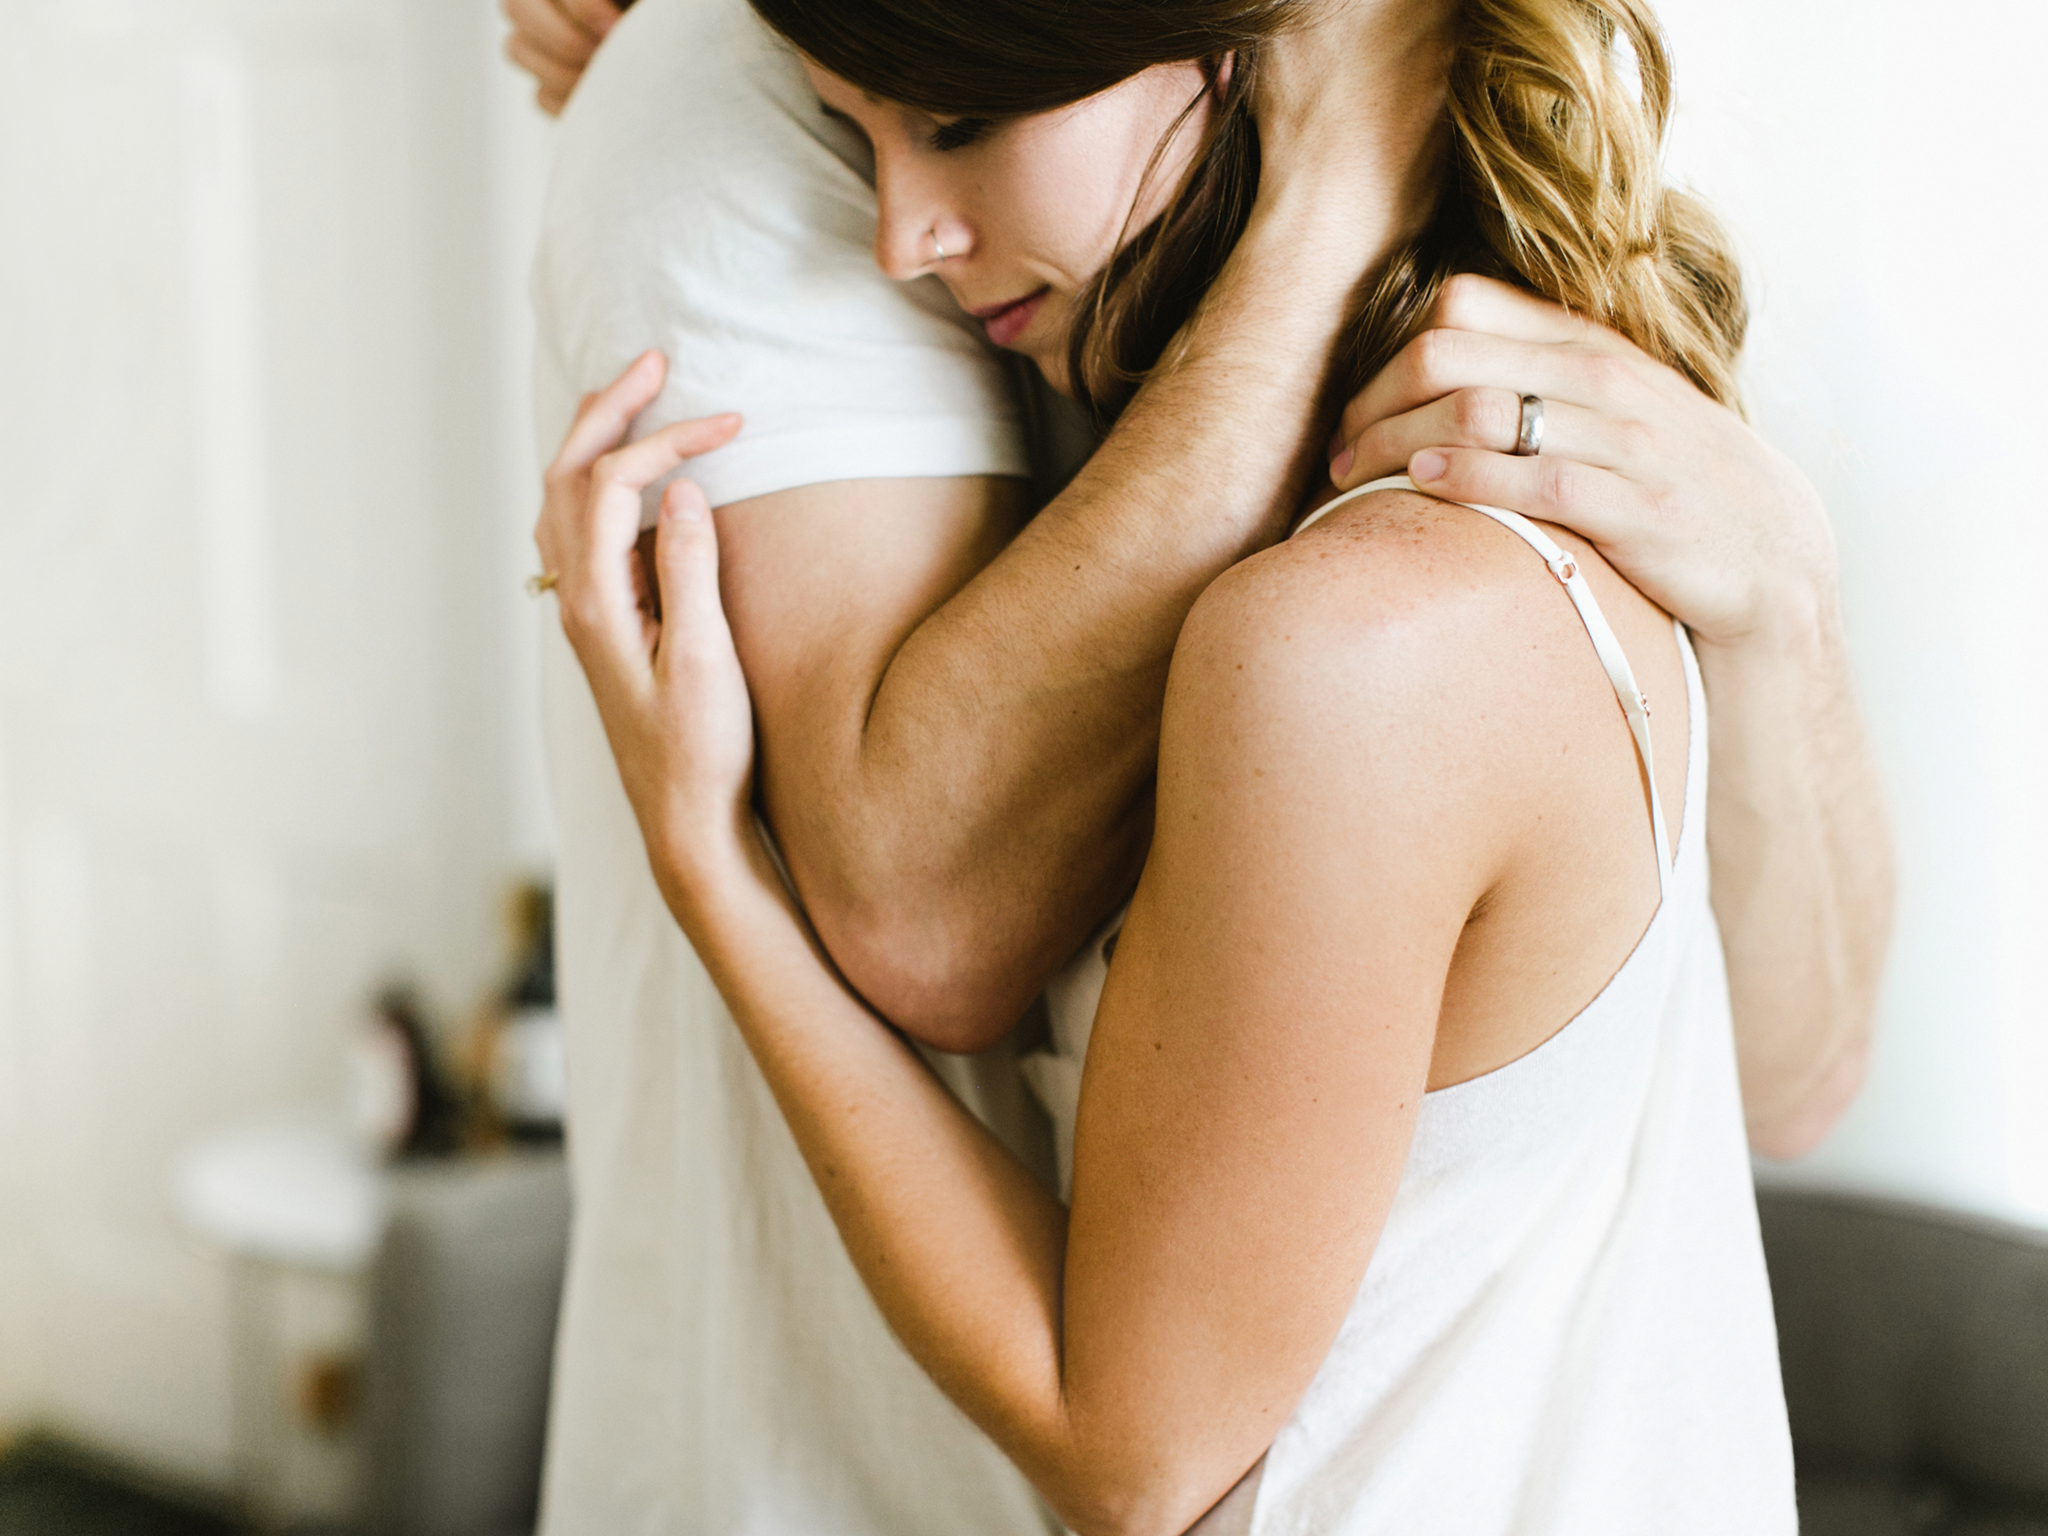 10 Signs You're In An Intimate Relationship